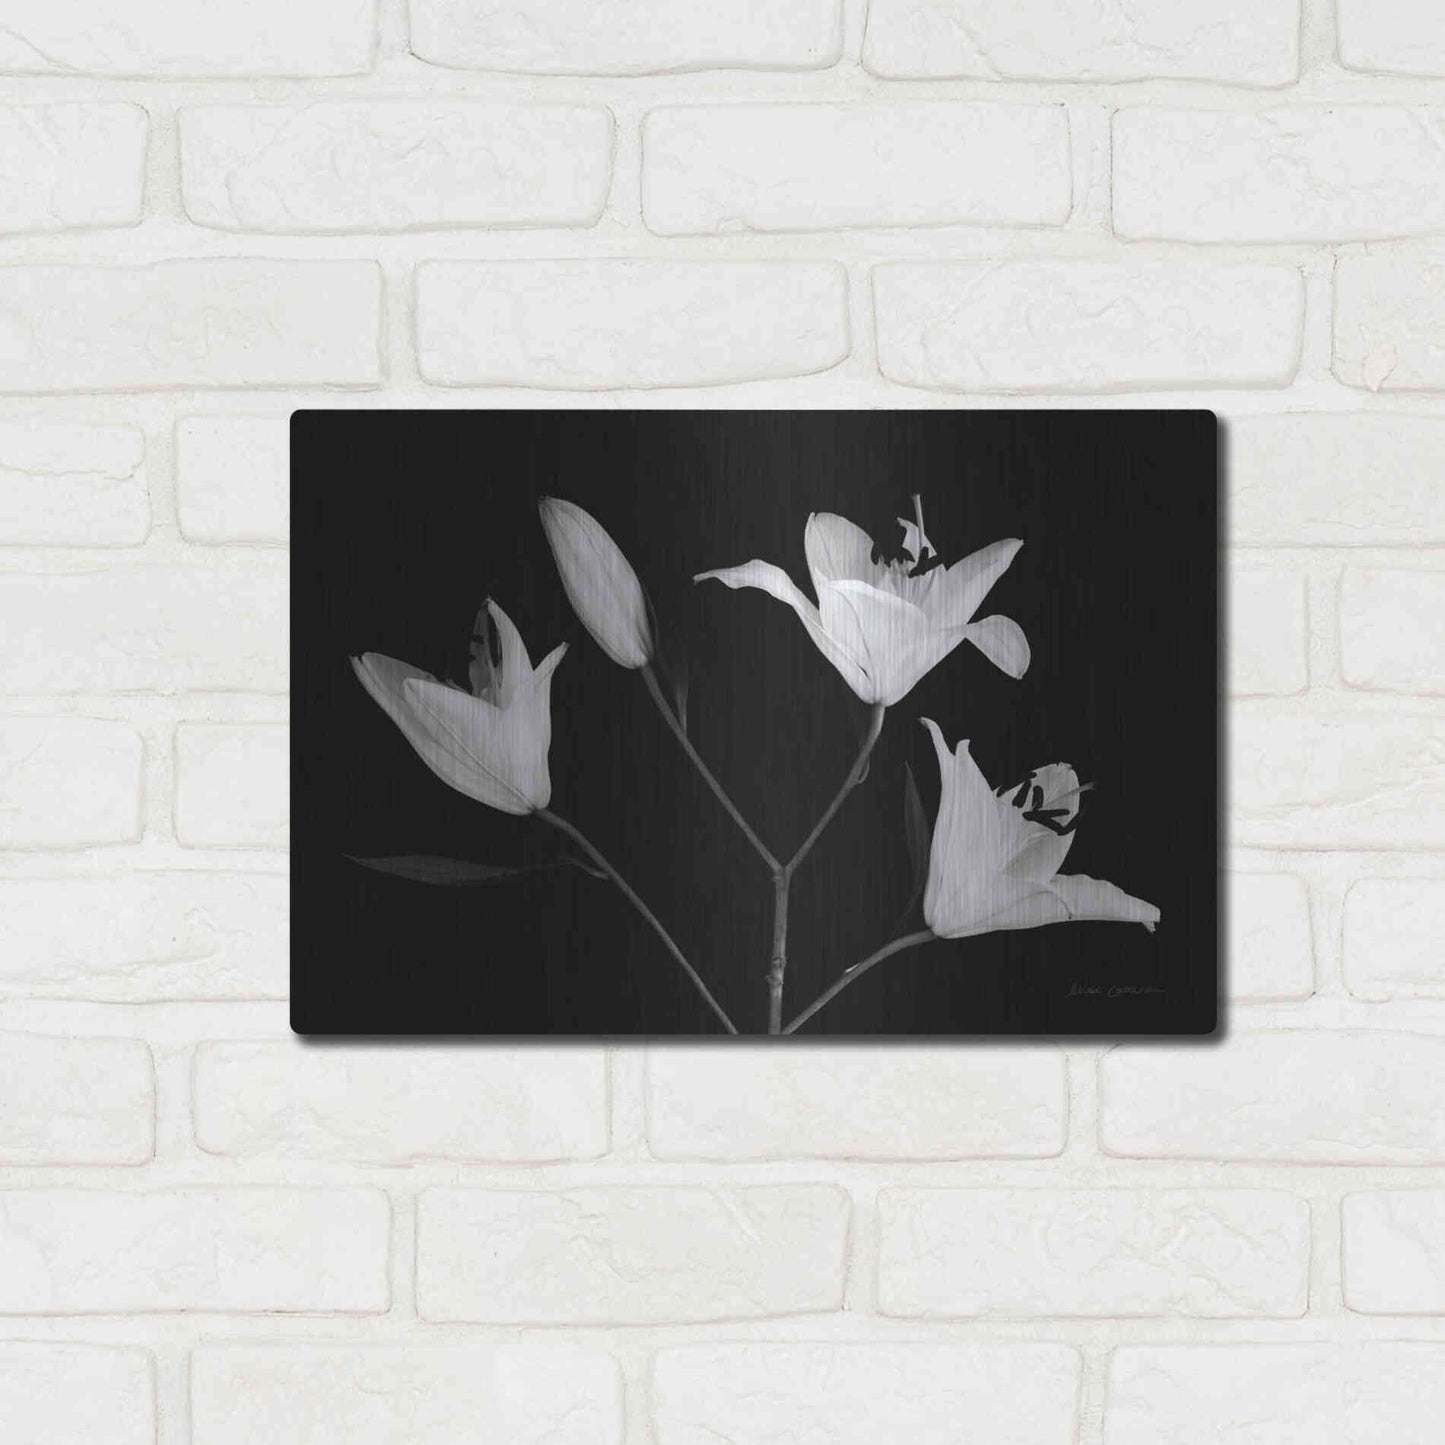 Luxe Metal Art 'Spray of Lilies' by Elise Catterall, Metal Wall Art,16x12